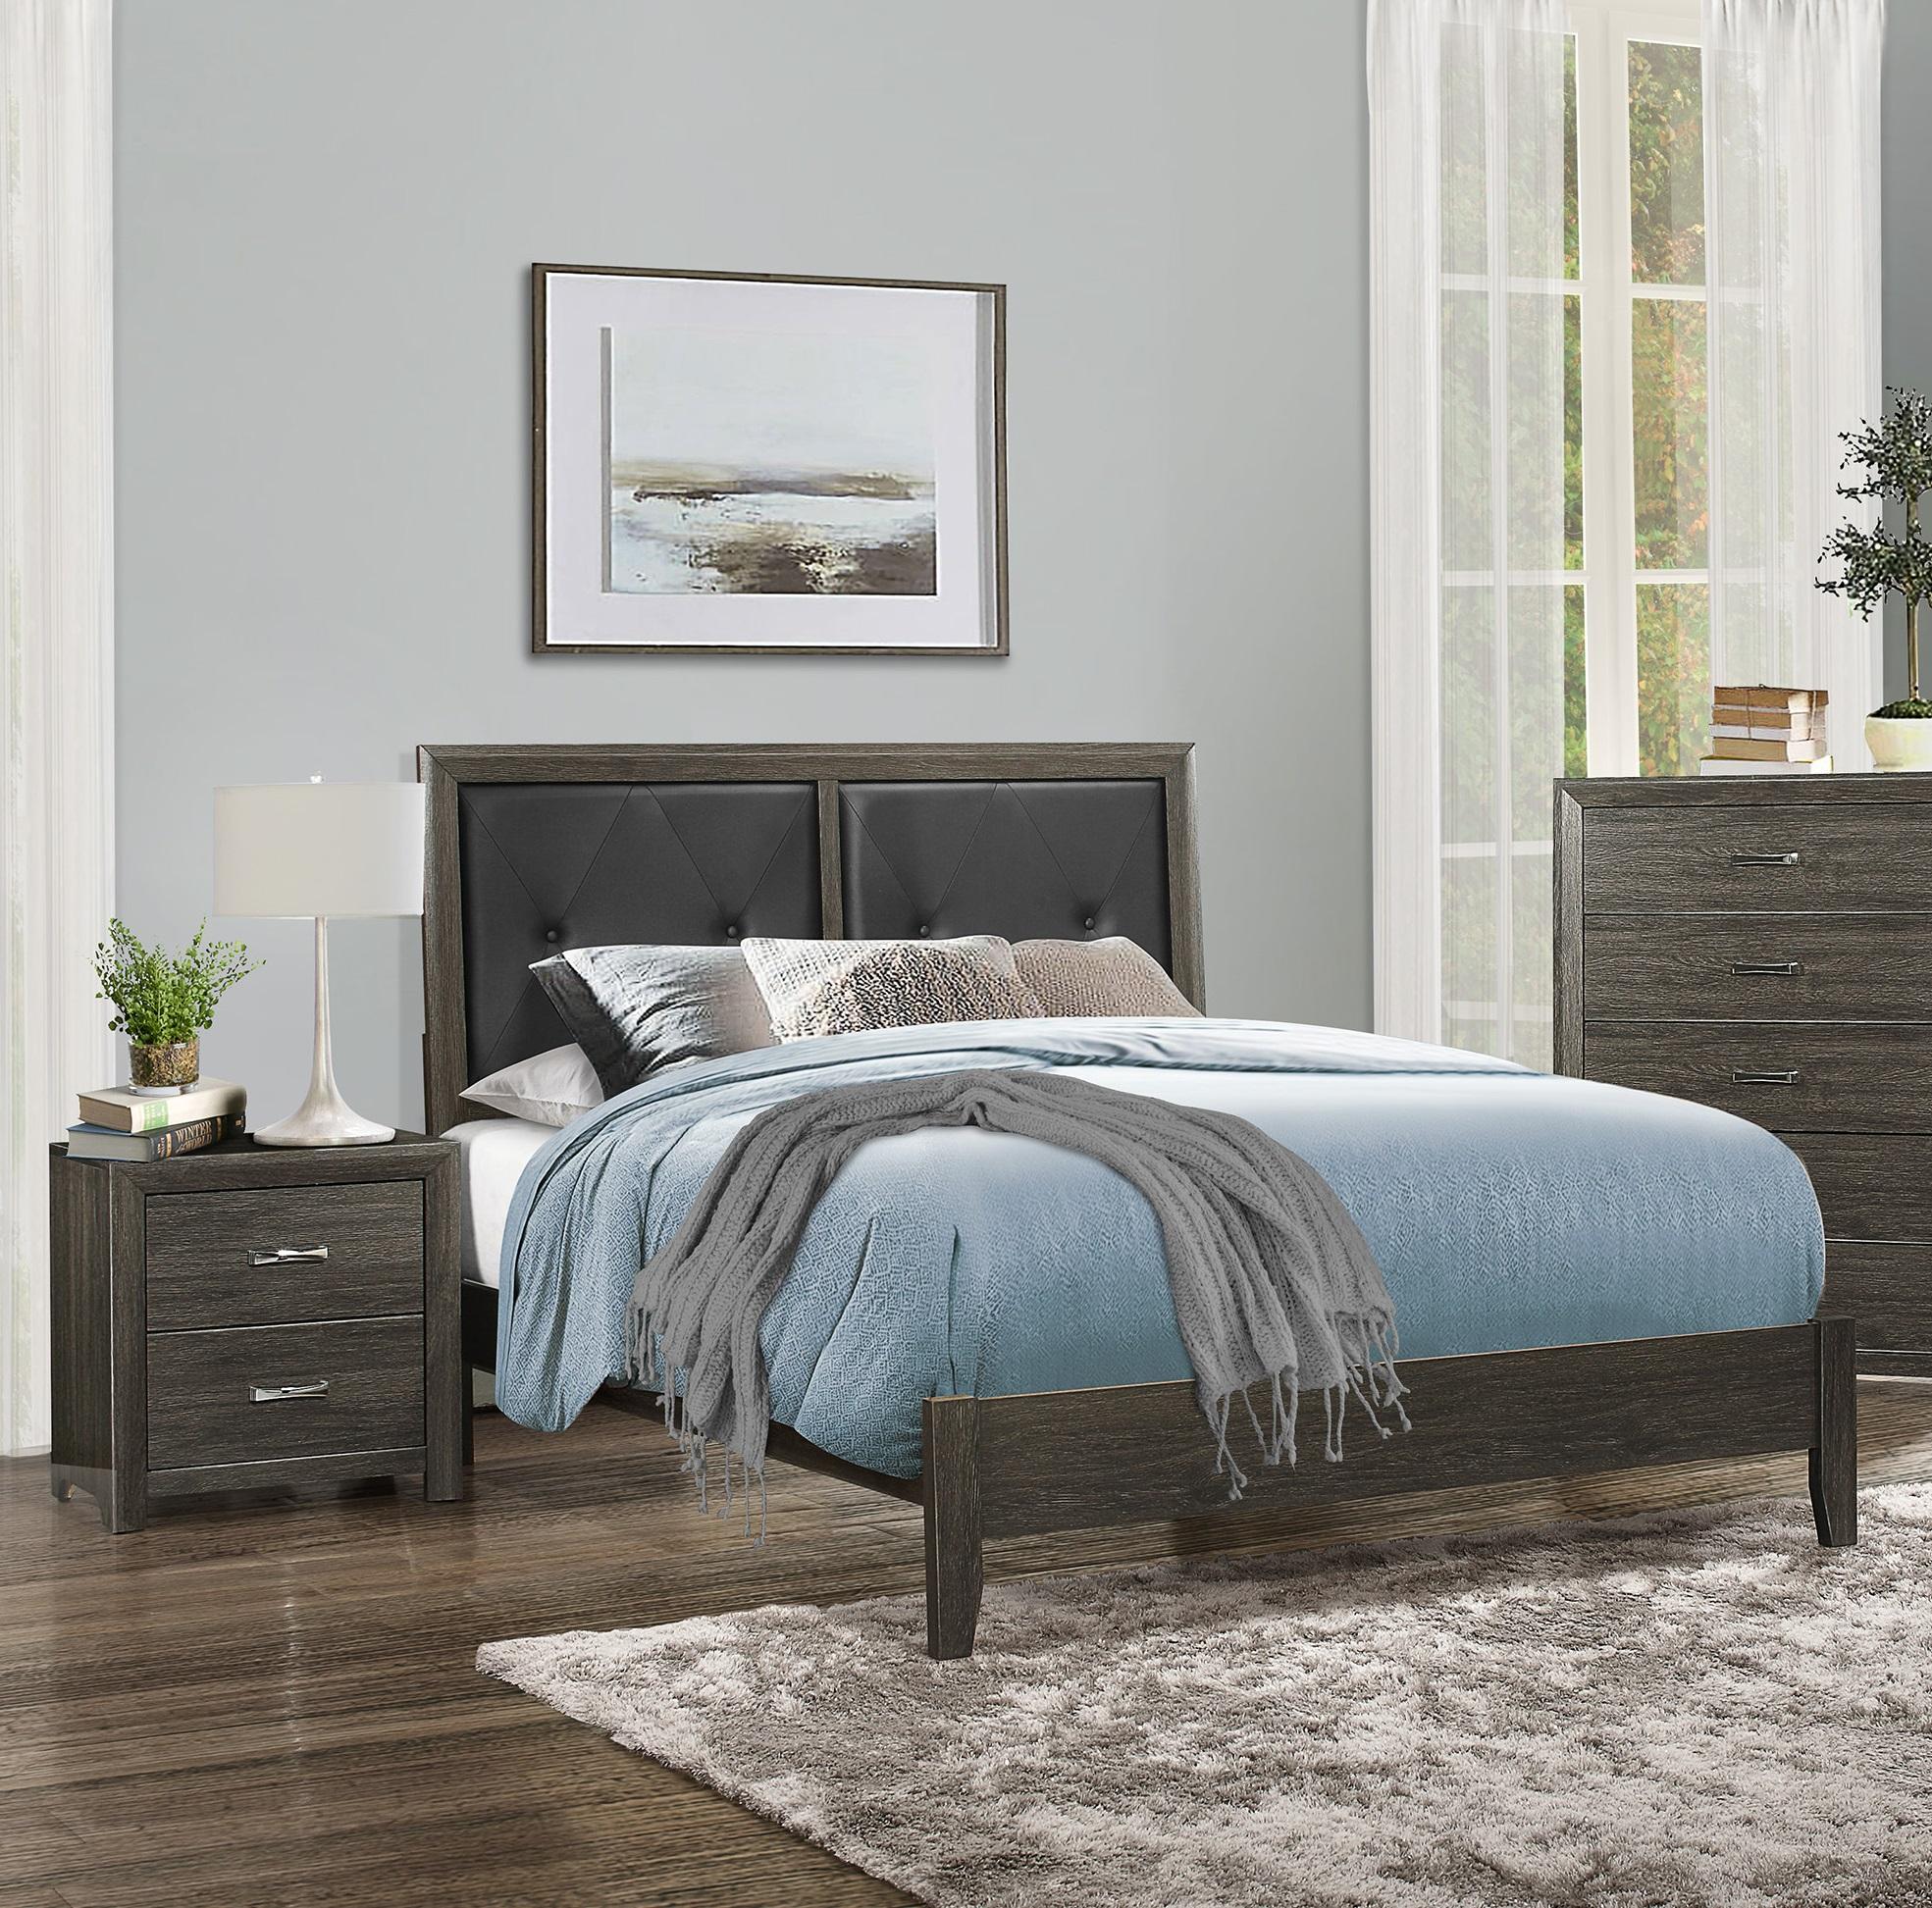 Contemporary Bedroom Set 2145FNP-1-3PC Edina 2145FNP-1-3PC in Dark Gray Faux Leather